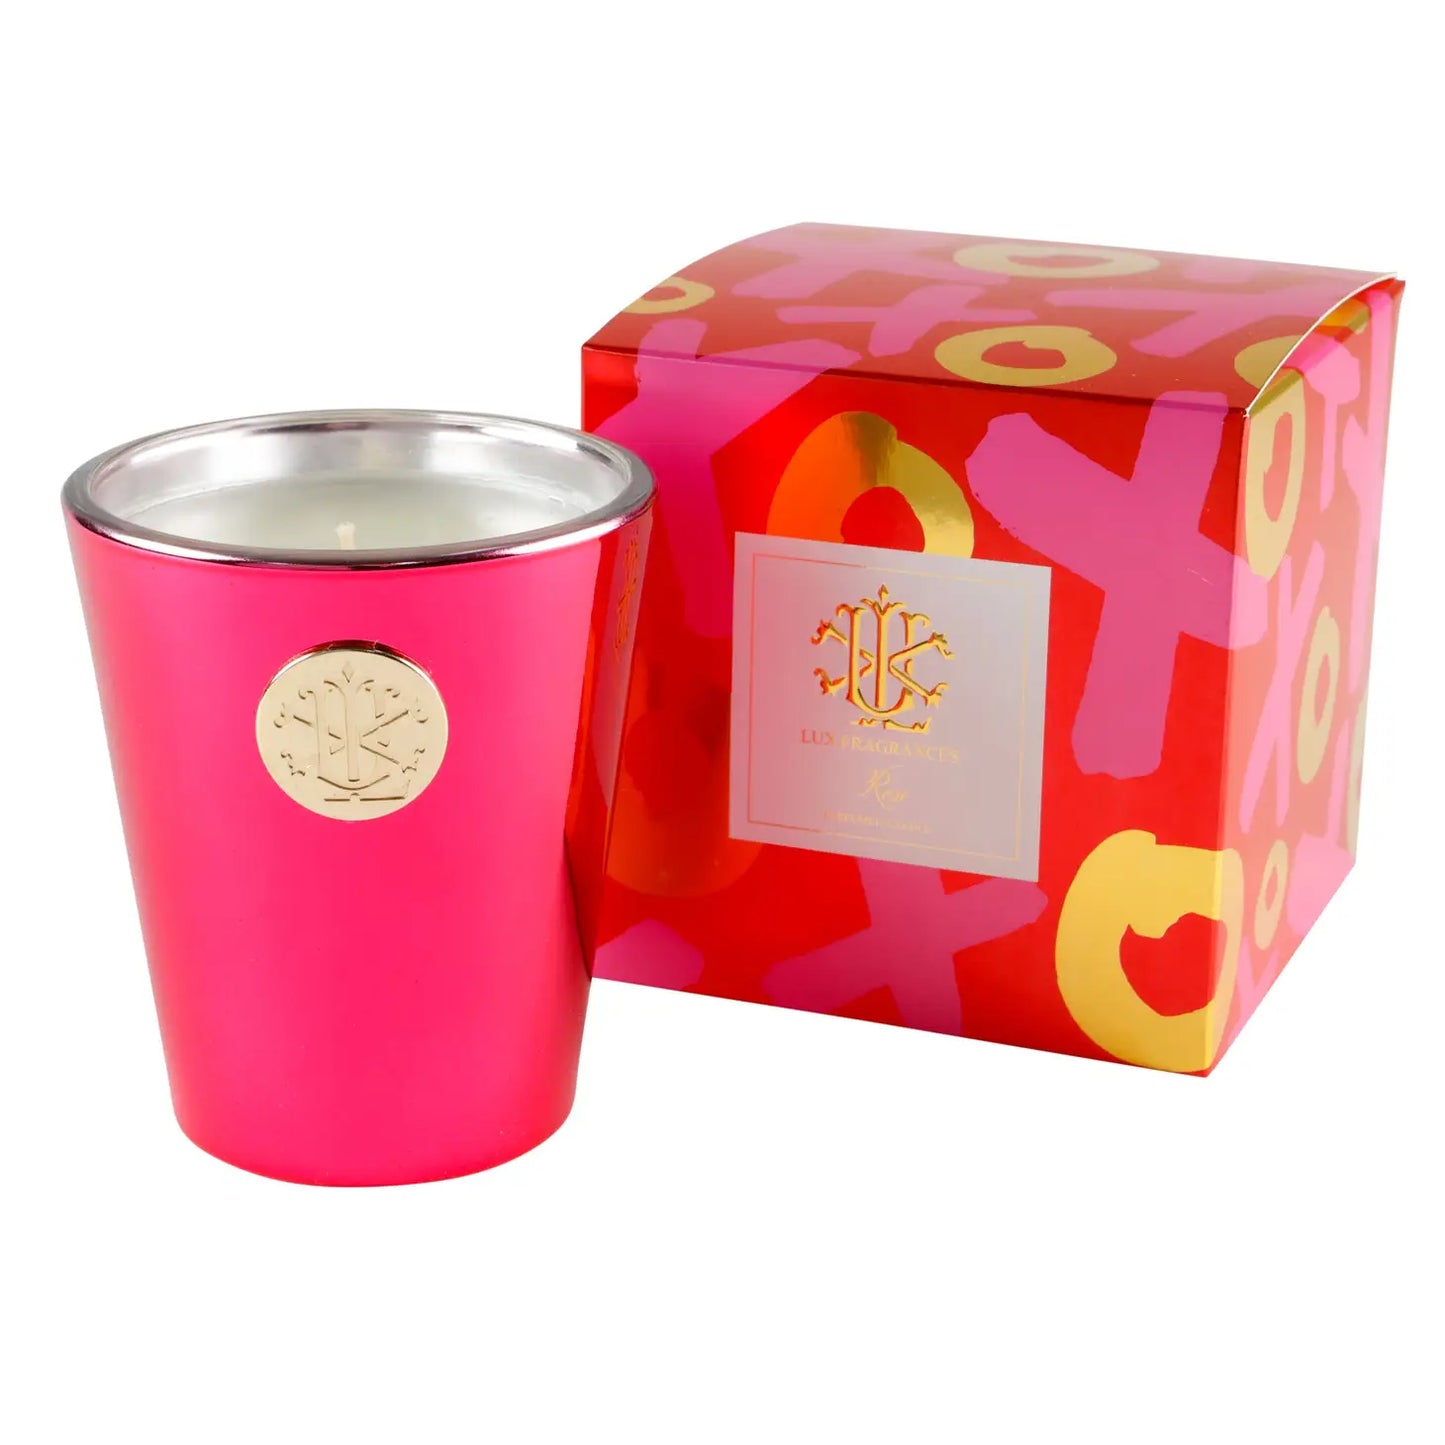 Lux Fragrances Rose Designer 8 oz Designer Boxed Candle available at The Good Life Boutique